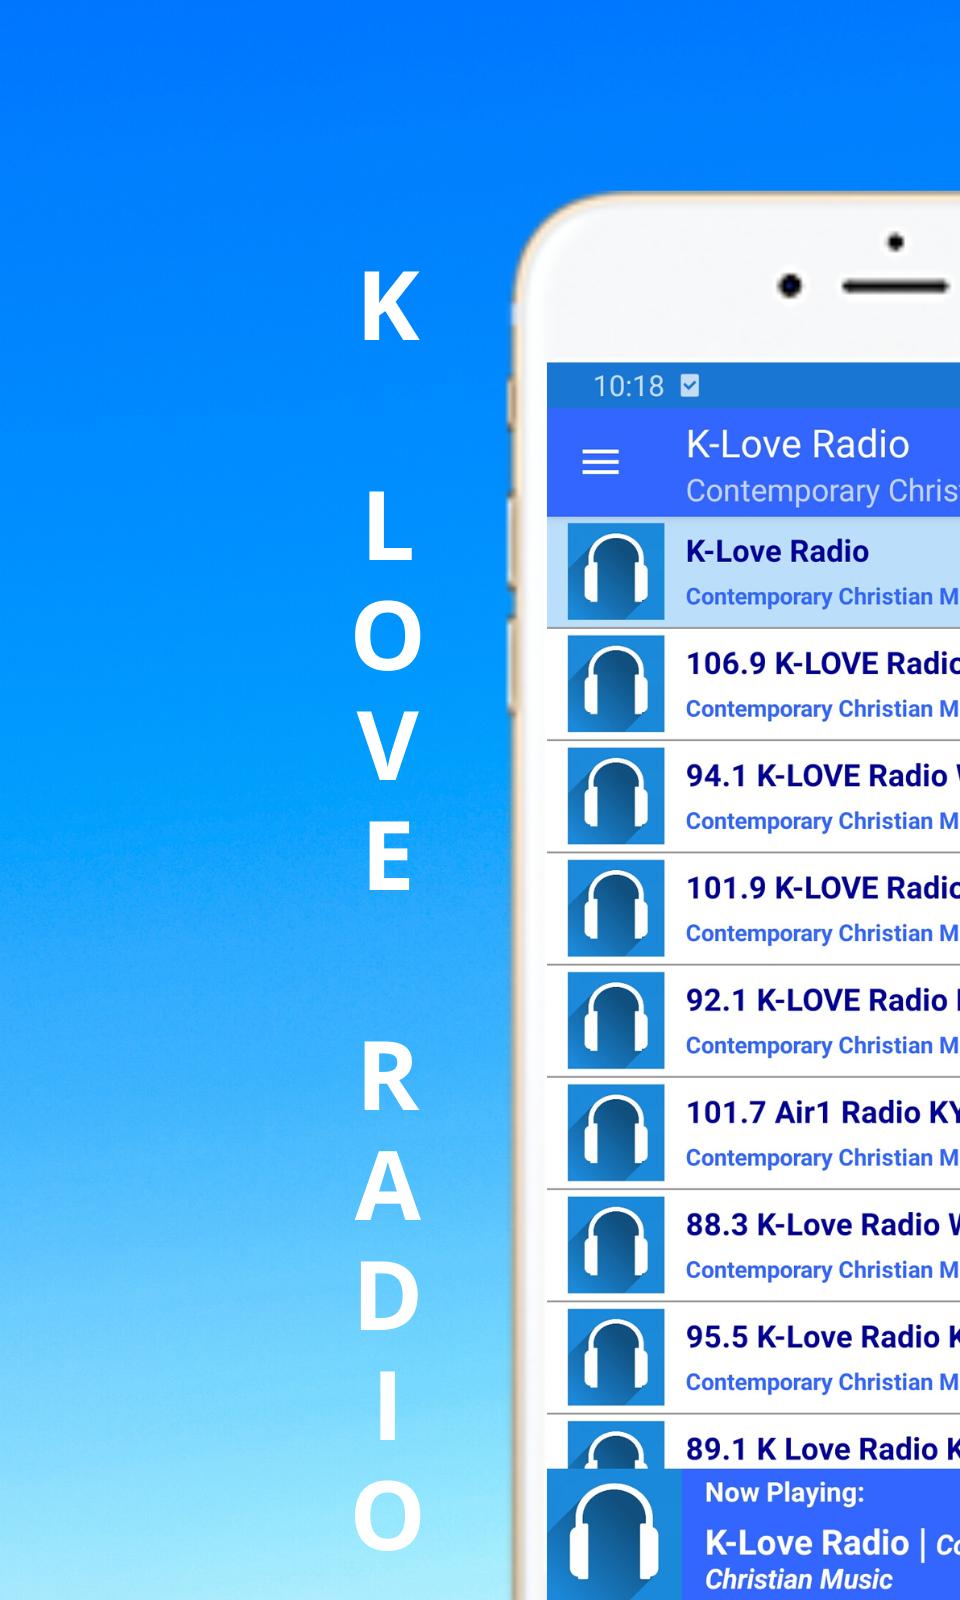 K-Love Radio Contemporany Christian Music Online for Android - APK Download